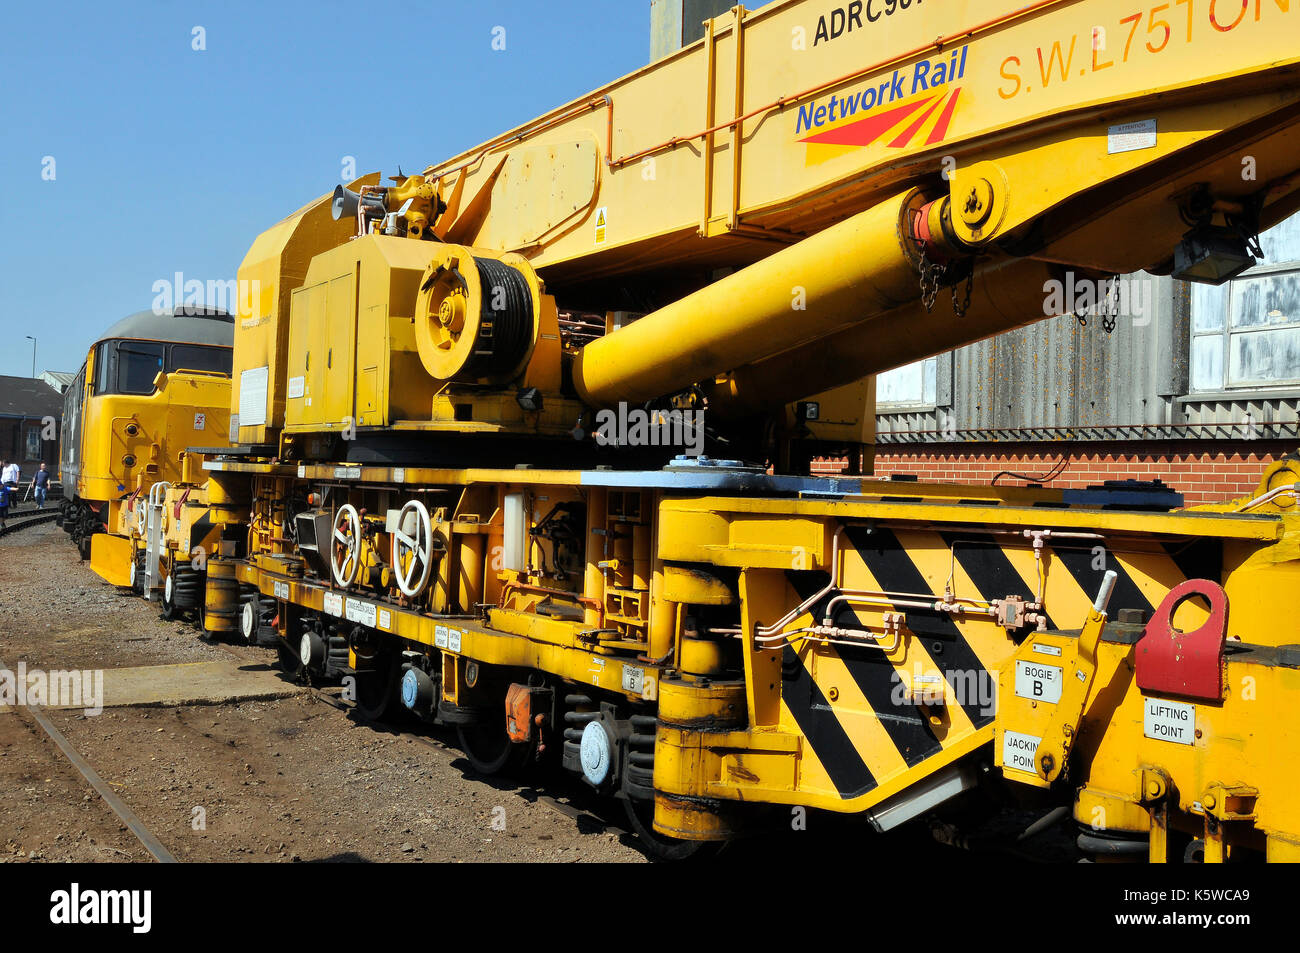 A large railway crane 75 tons in yellow livery network rail engineering machinery and works heavy lifting infrastructure projects and maintenance work Stock Photo